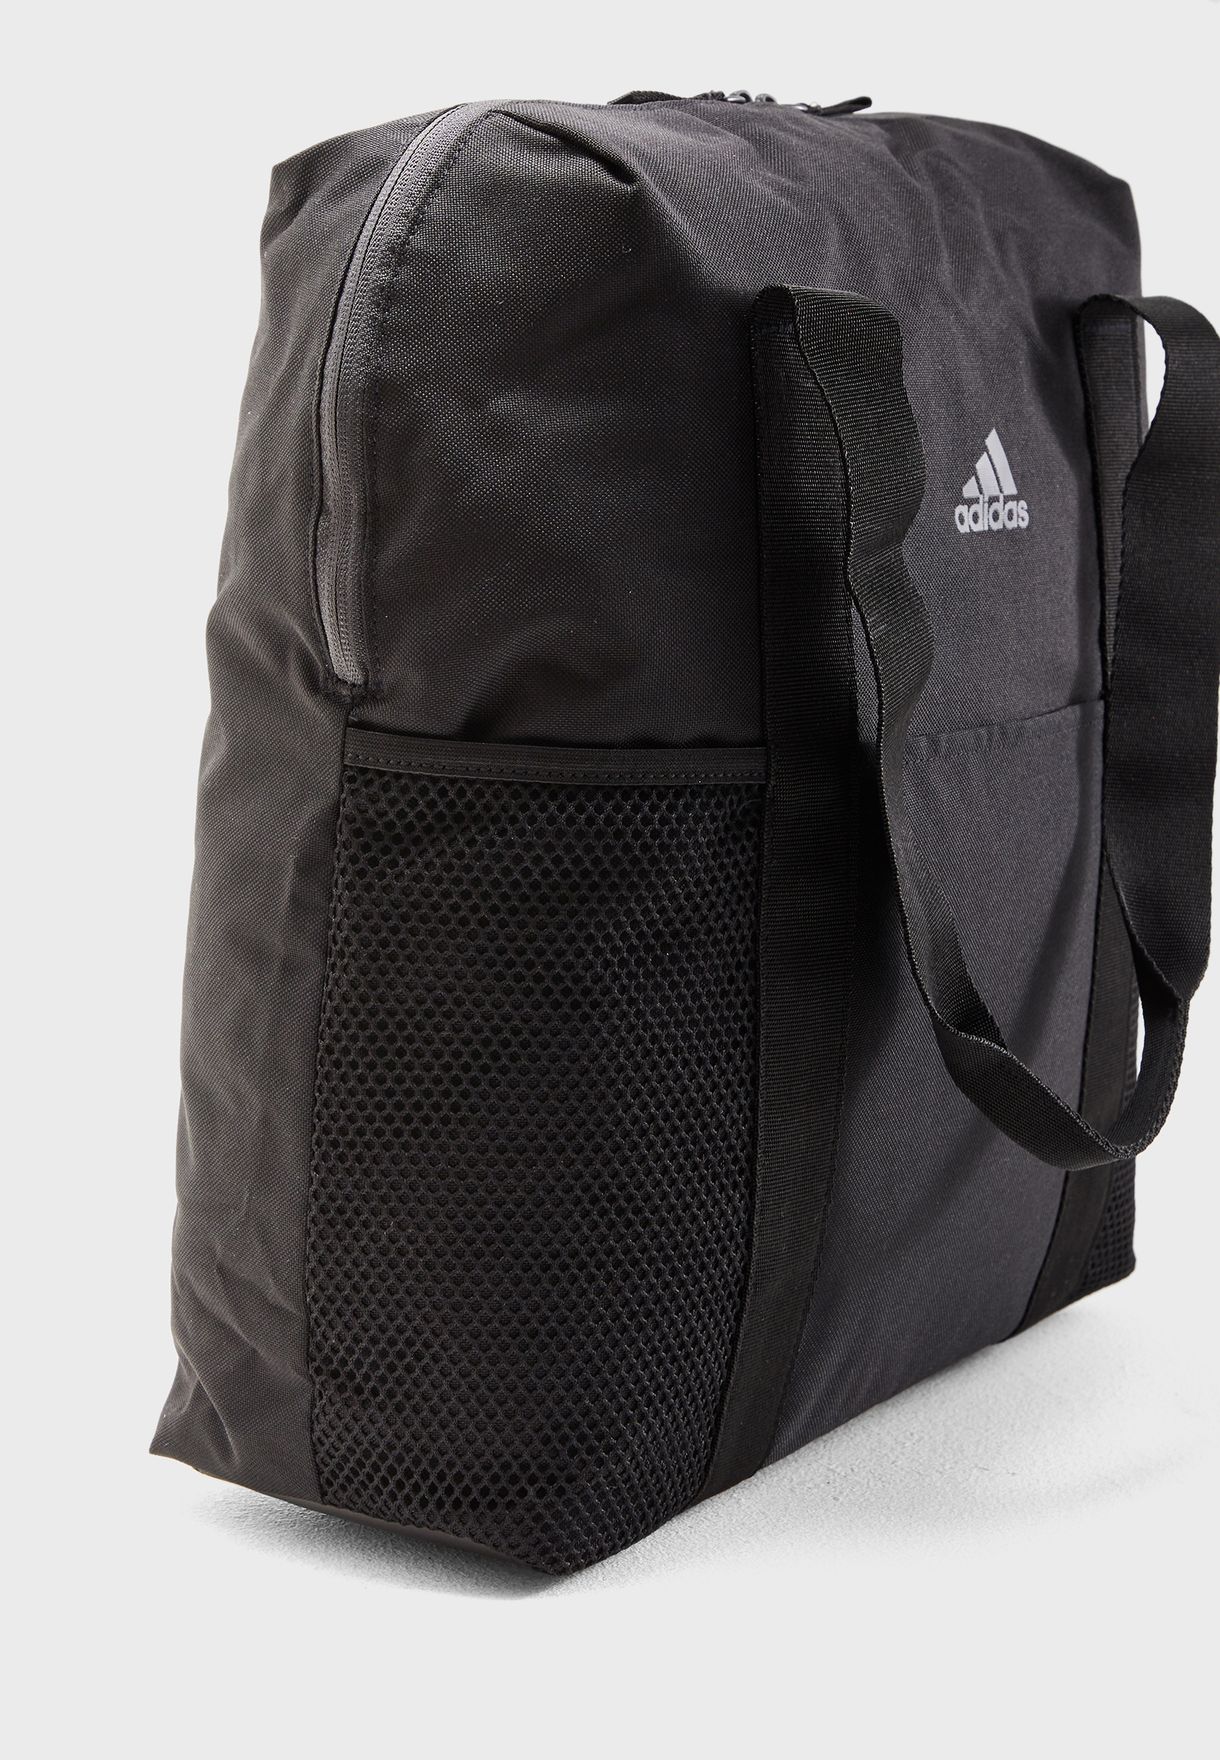 Buy adidas black Core Tote for Women in 